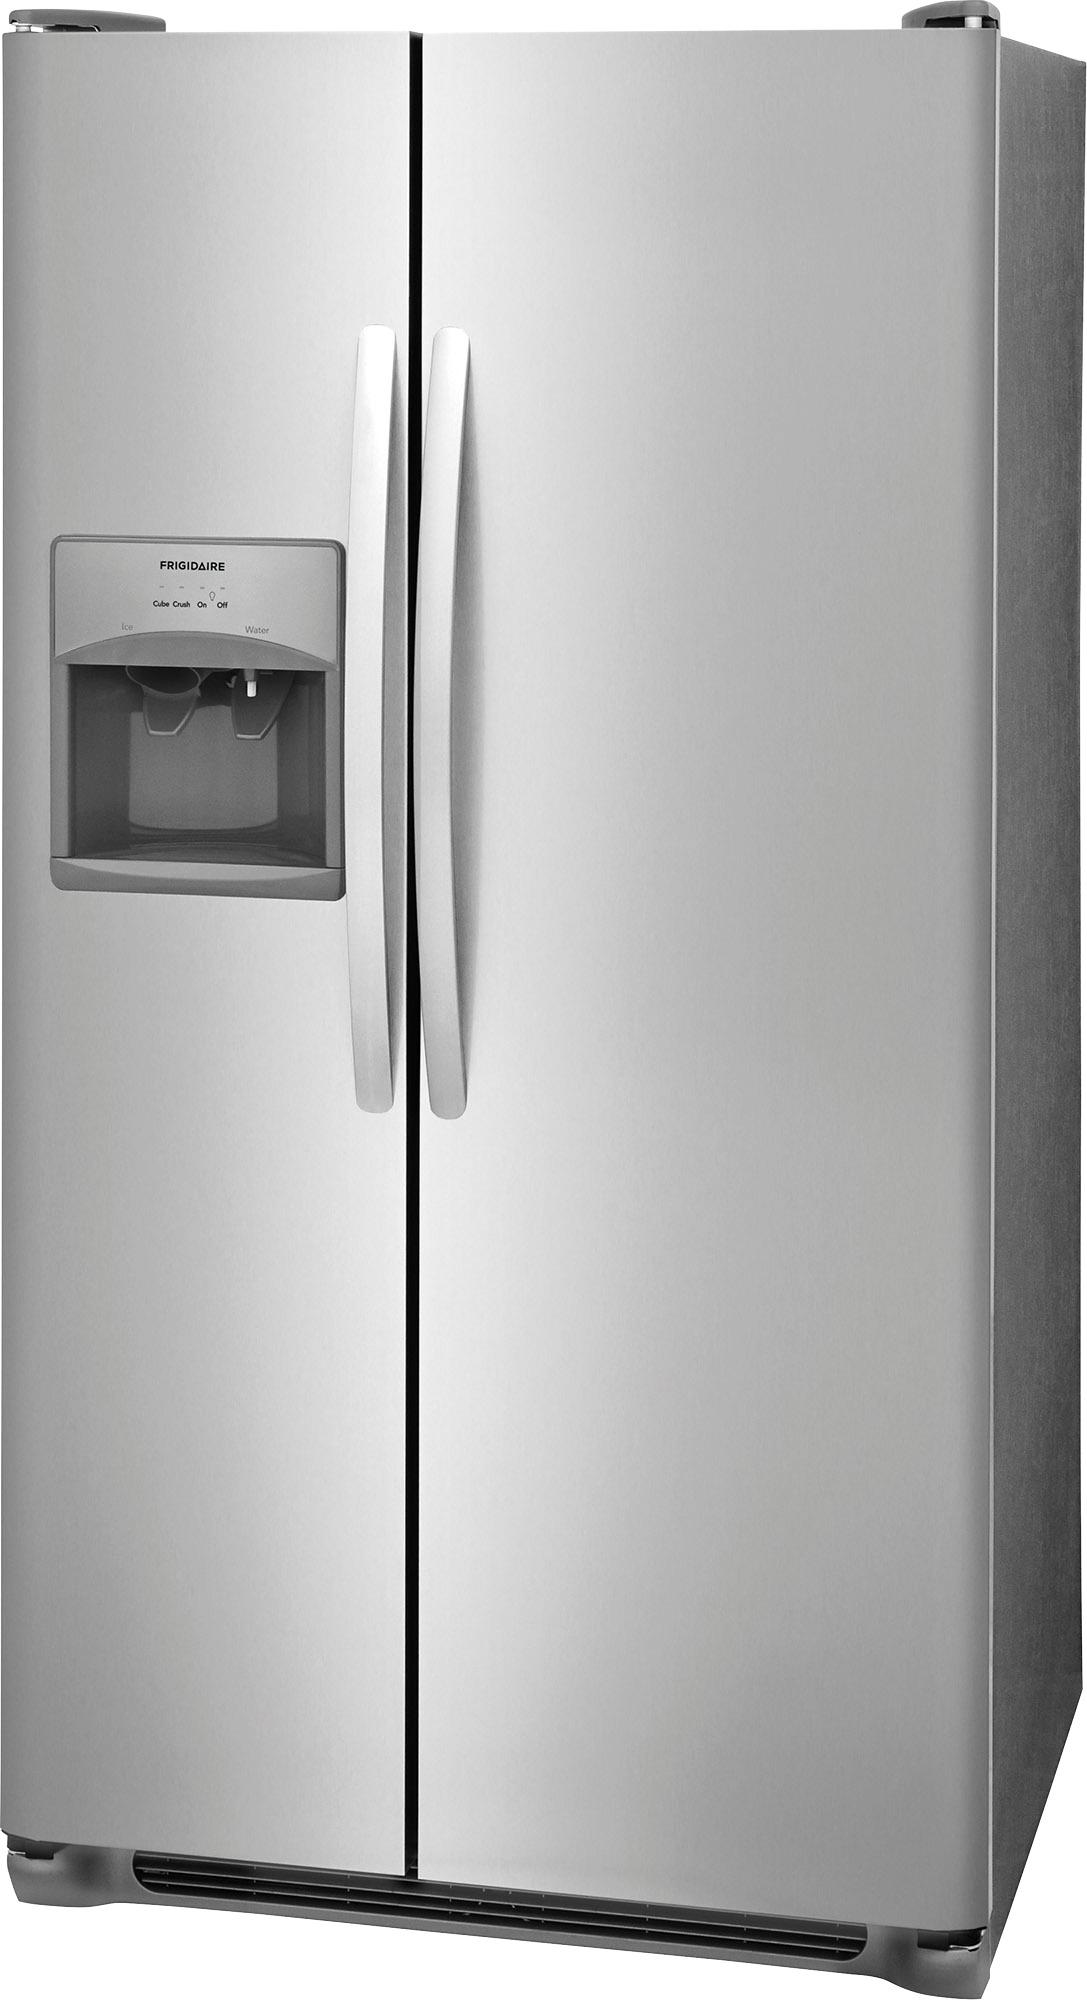 Left View: Frigidaire - 25.6 Cu. Ft. Side-by-Side Refrigerator - Stainless steel